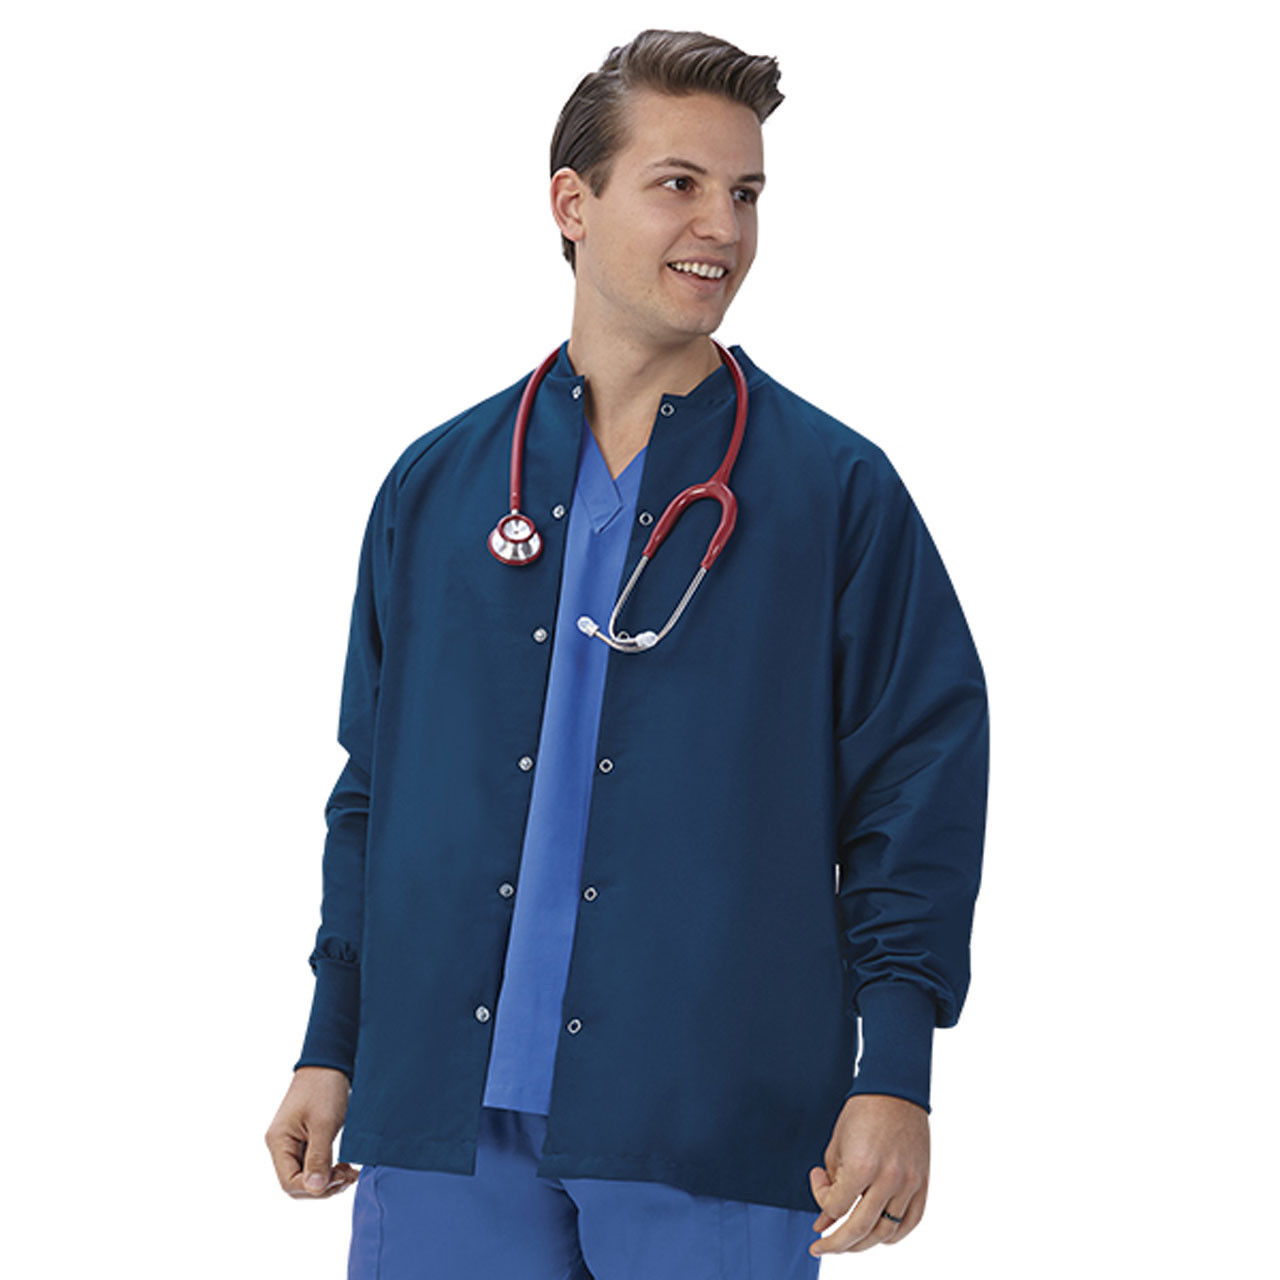 Wholesale Warm Up Scrub Jacket in Navy, Unisex - Bulk of 48 Questions & Answers